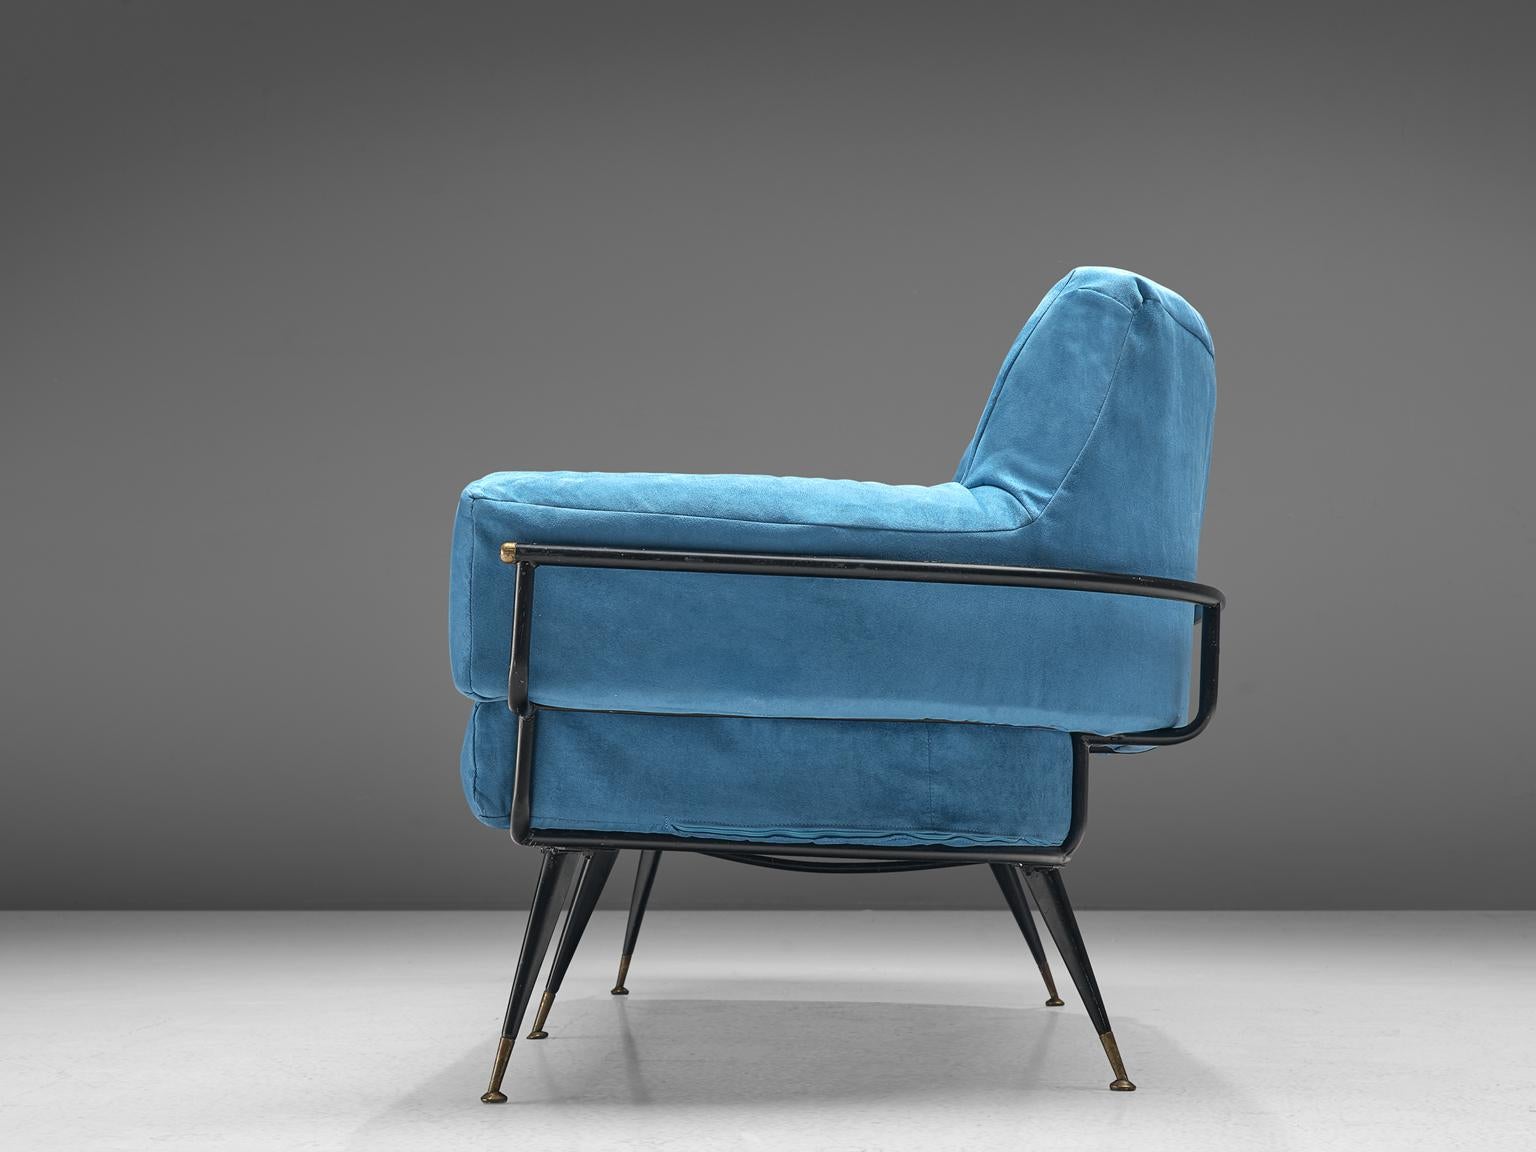 Mid-20th Century Valla Rito Sofa with Metal Frame in Azure Blue Upholstery